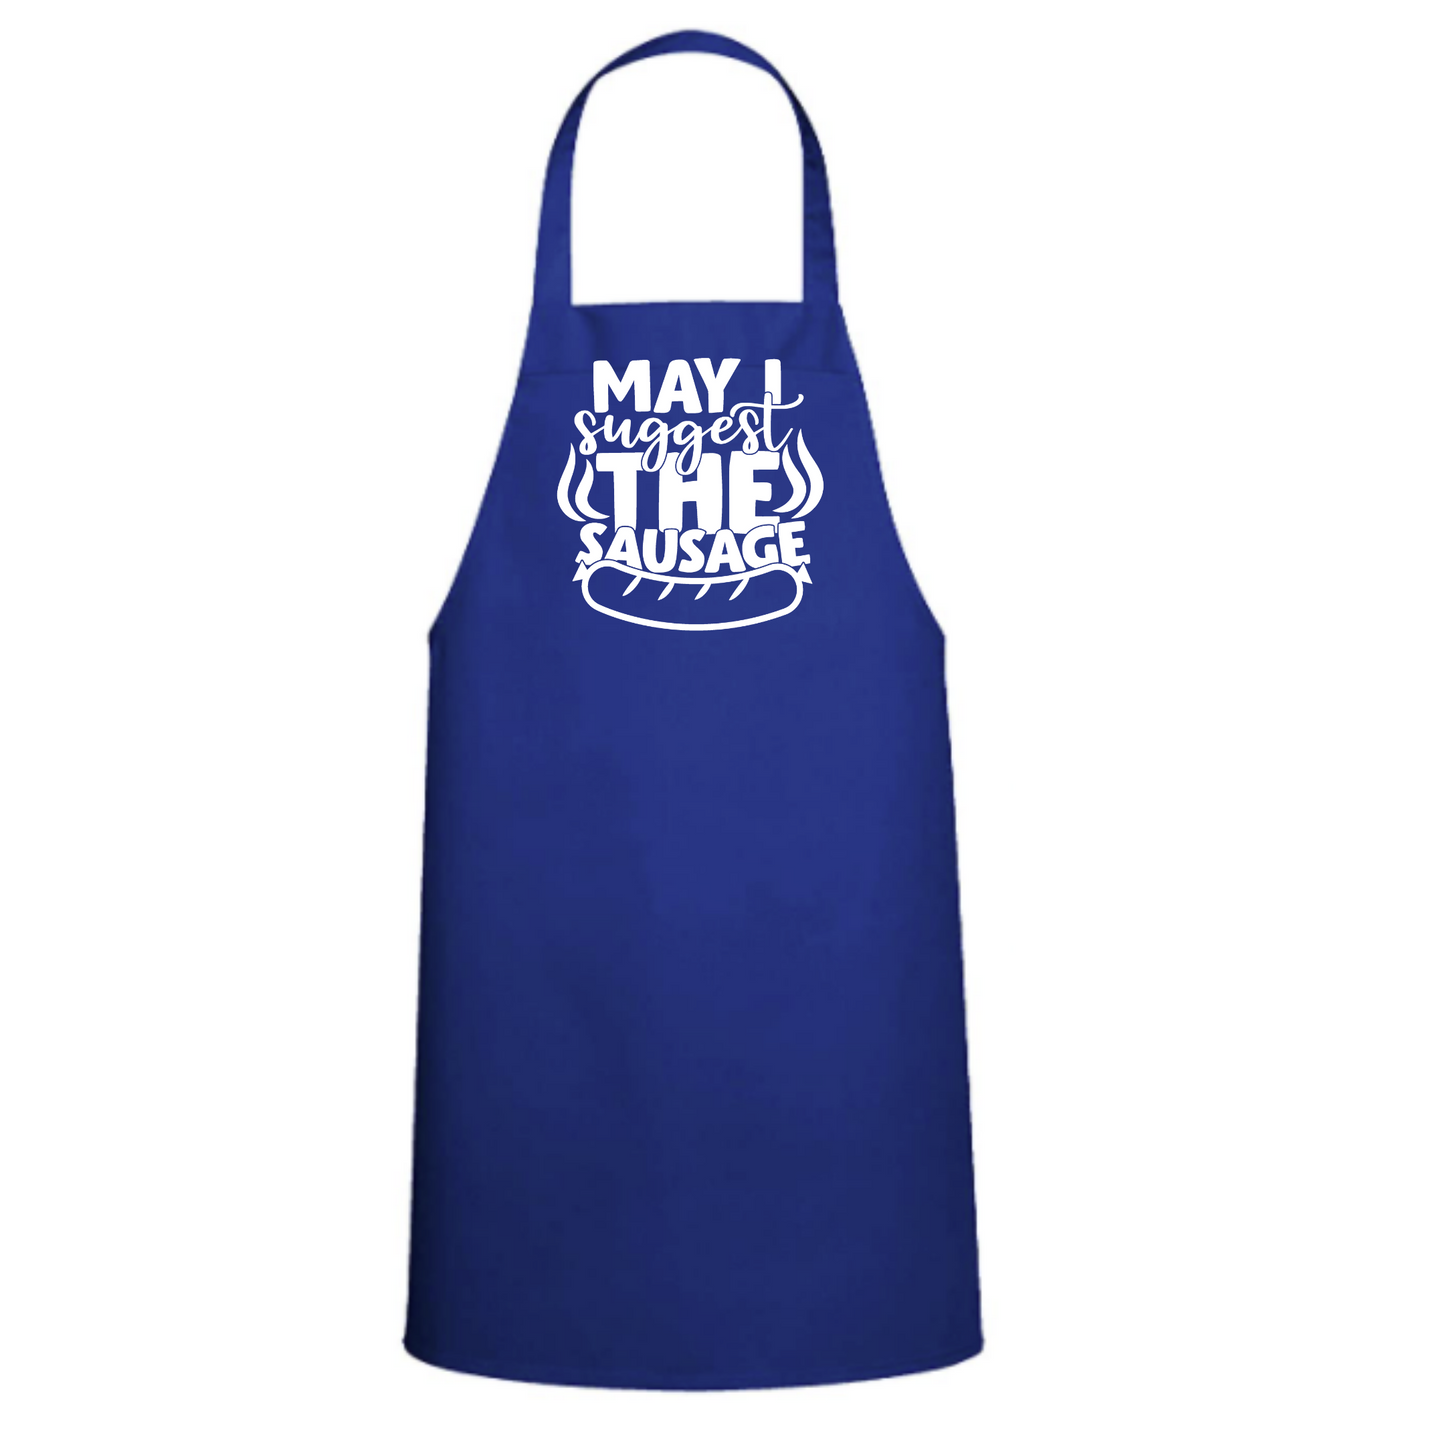 May I Suggest the Sausage Apron - Great Gift - Commercial Grade - Mister Snarky's